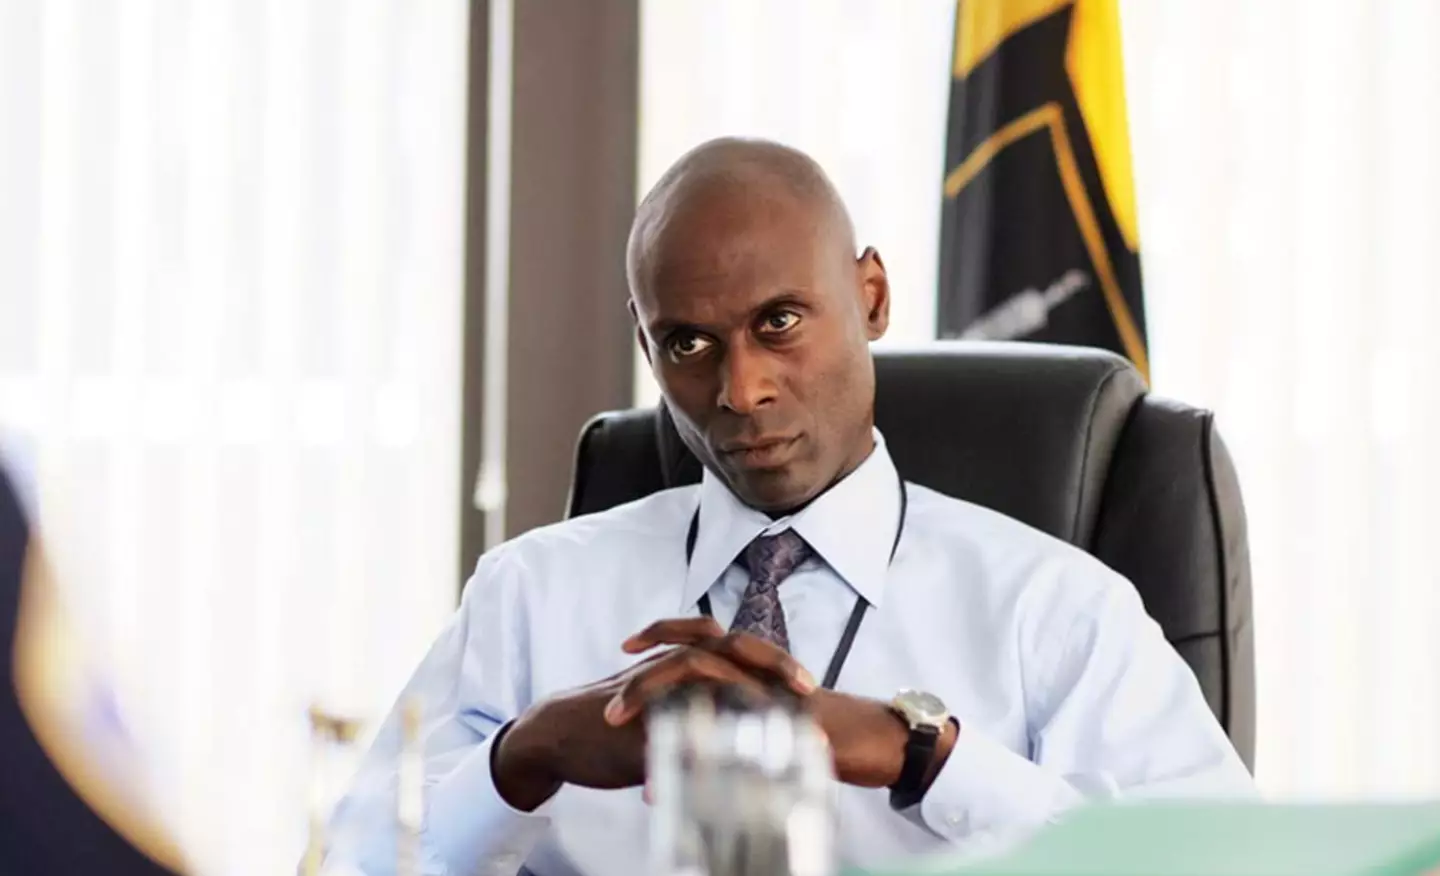 Lance Reddick was also known for his performance as Cedric Daniels on The Wire.